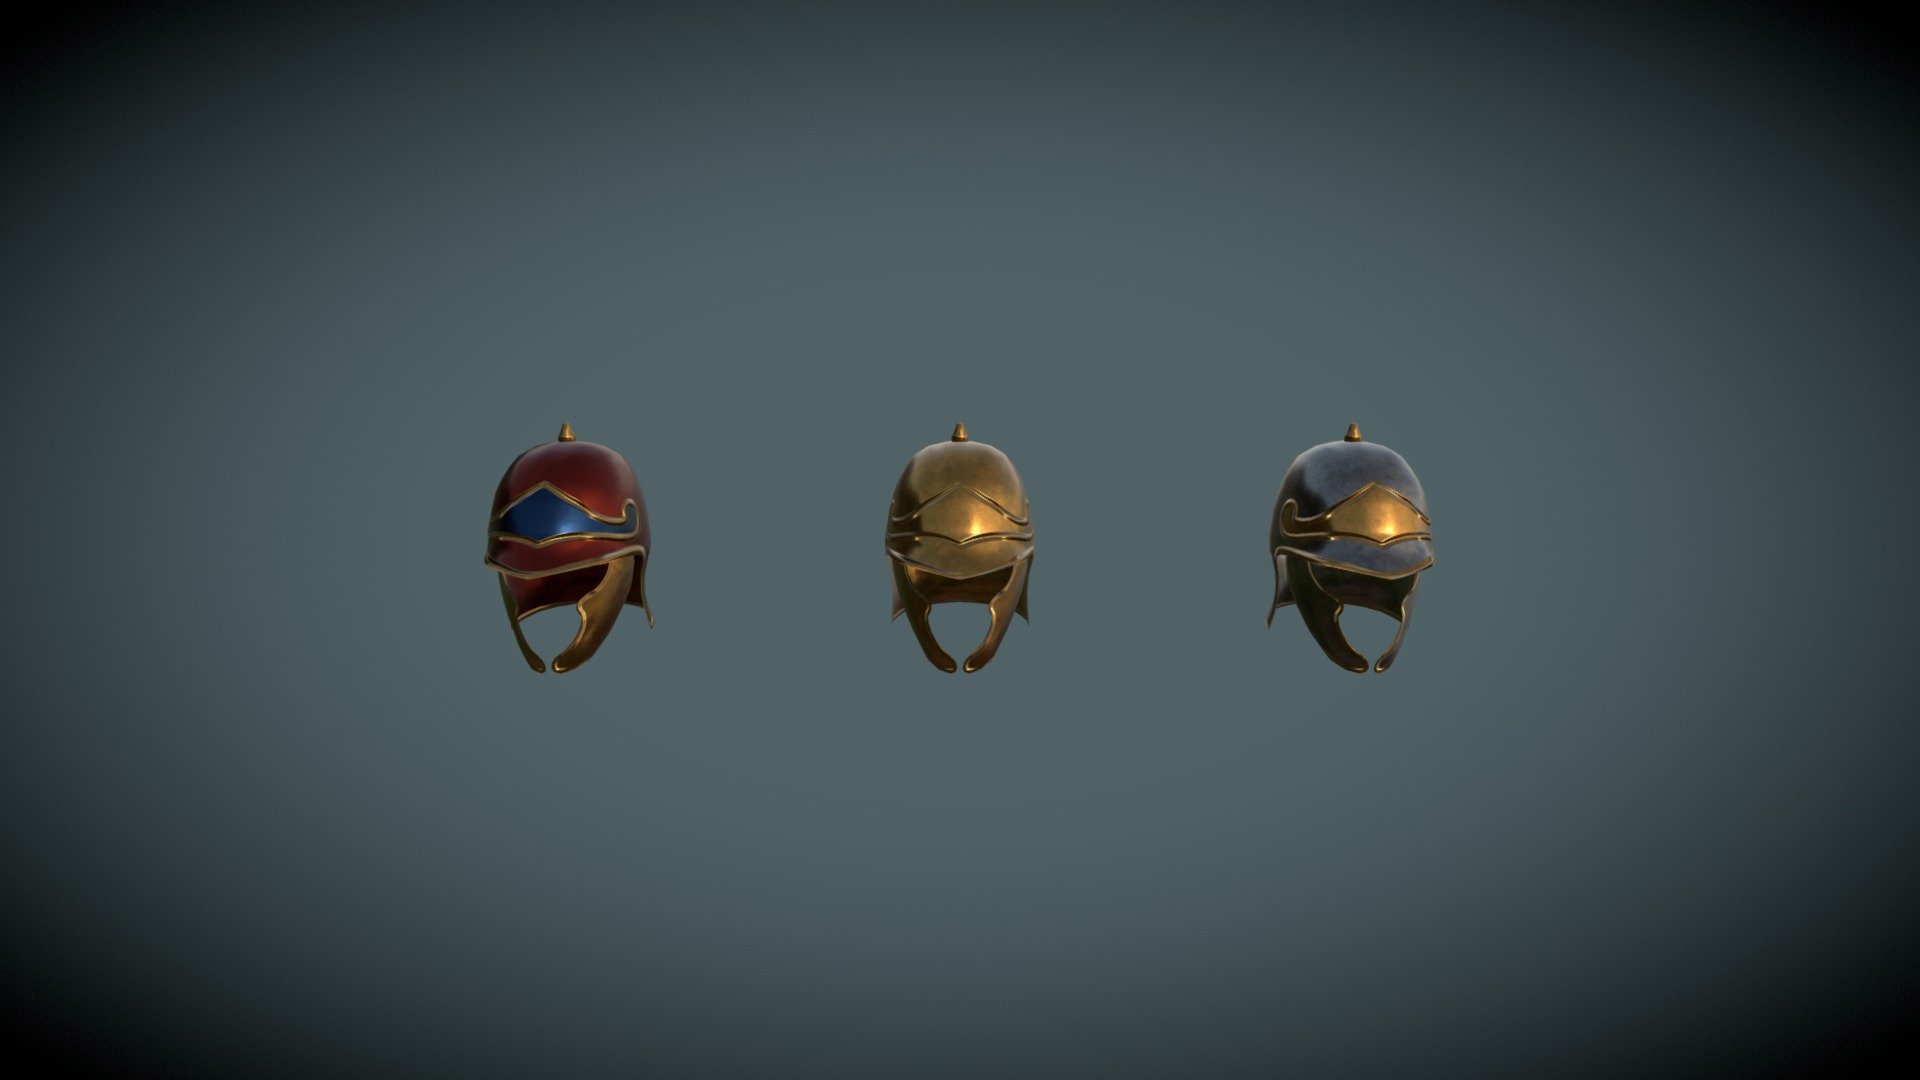 Helmet variations of the Ascalon type

Made for the RIR: Imperium Surrectum mod, for the game Rome Total War Remastered.

Made in Blender - 673 vertices / 1281 edges

The process consists of modelling a low poly version, from which a copy is made with a very high dense mesh where details are sculpted in, later baked onto its low poly counterpart.

The different colours are textured painted in - Ascalon Helmets - 3D model by João Paulo (@Grimbold) 3d model